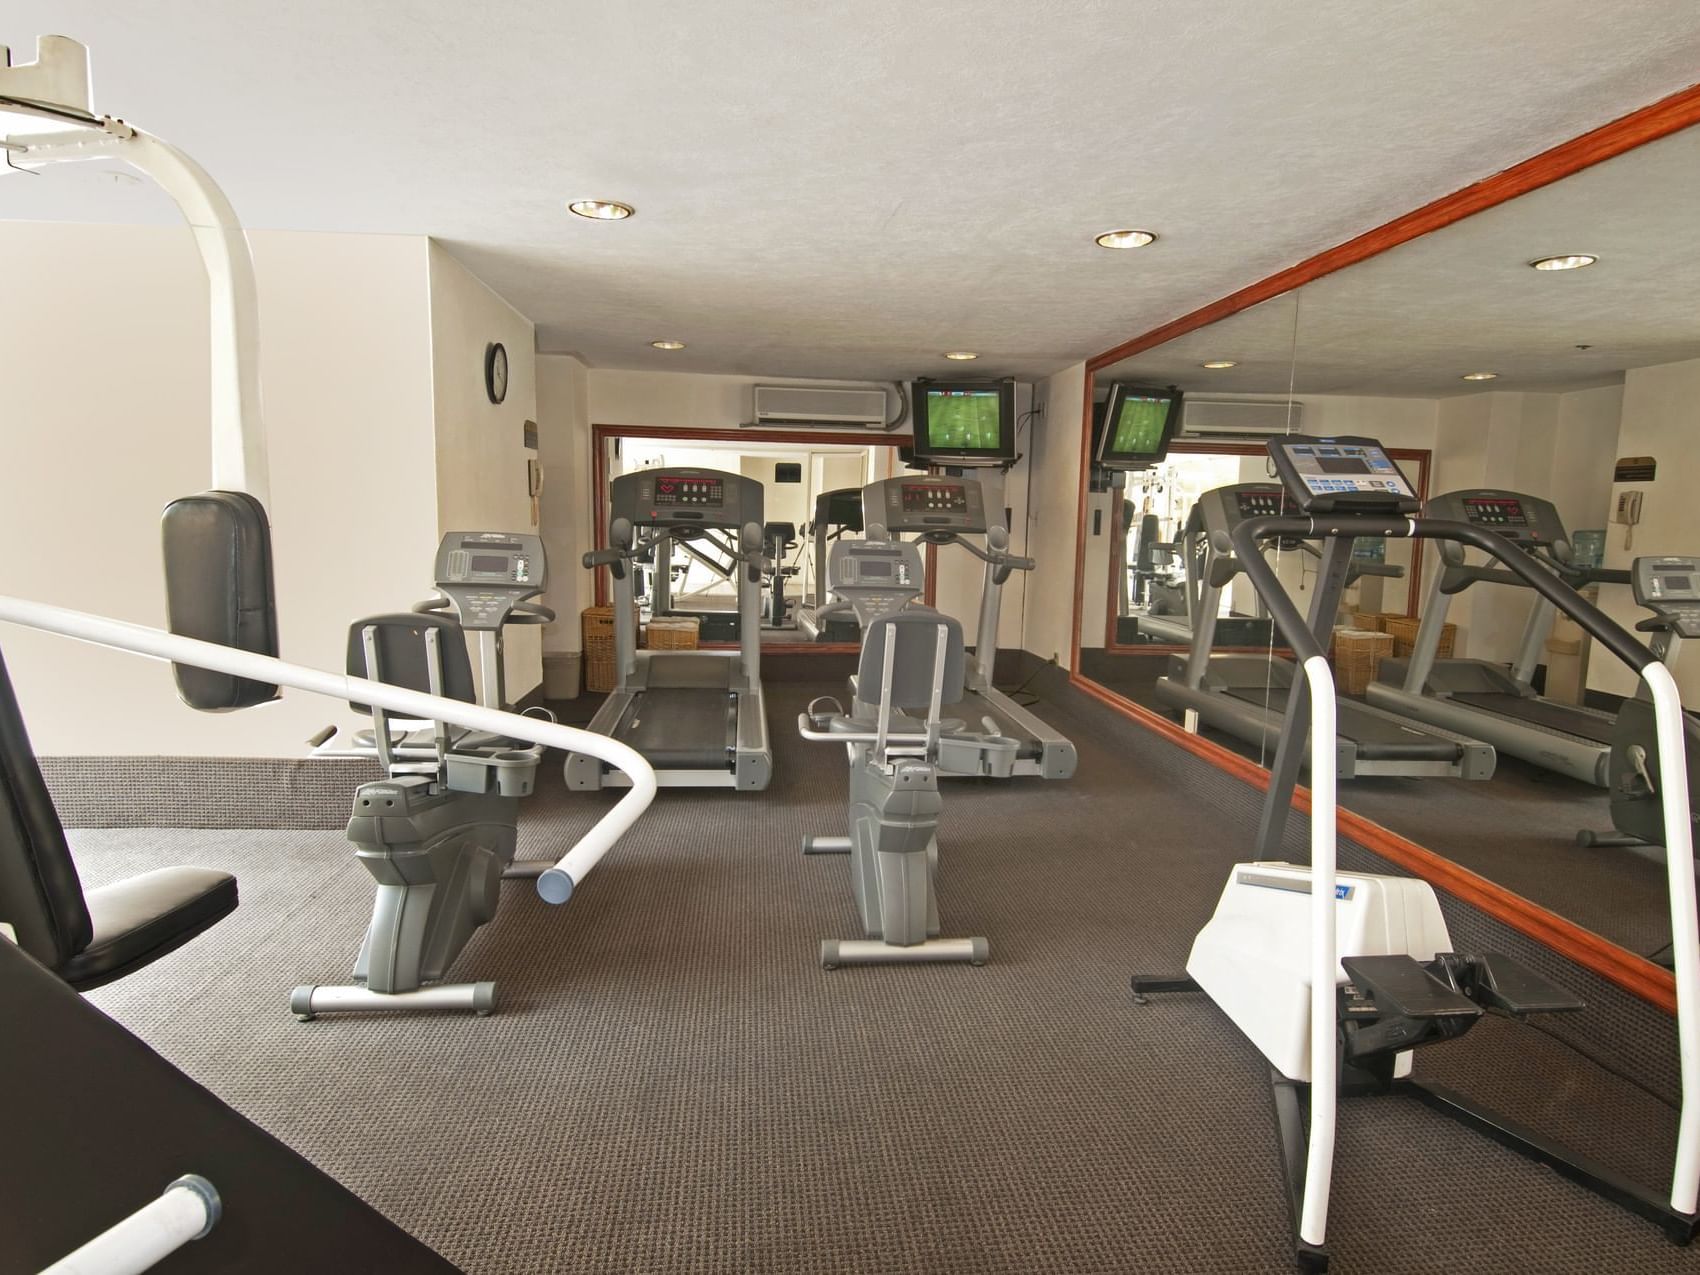 Exercise machines in a Gym wellness center at Fiesta Inn Hotels